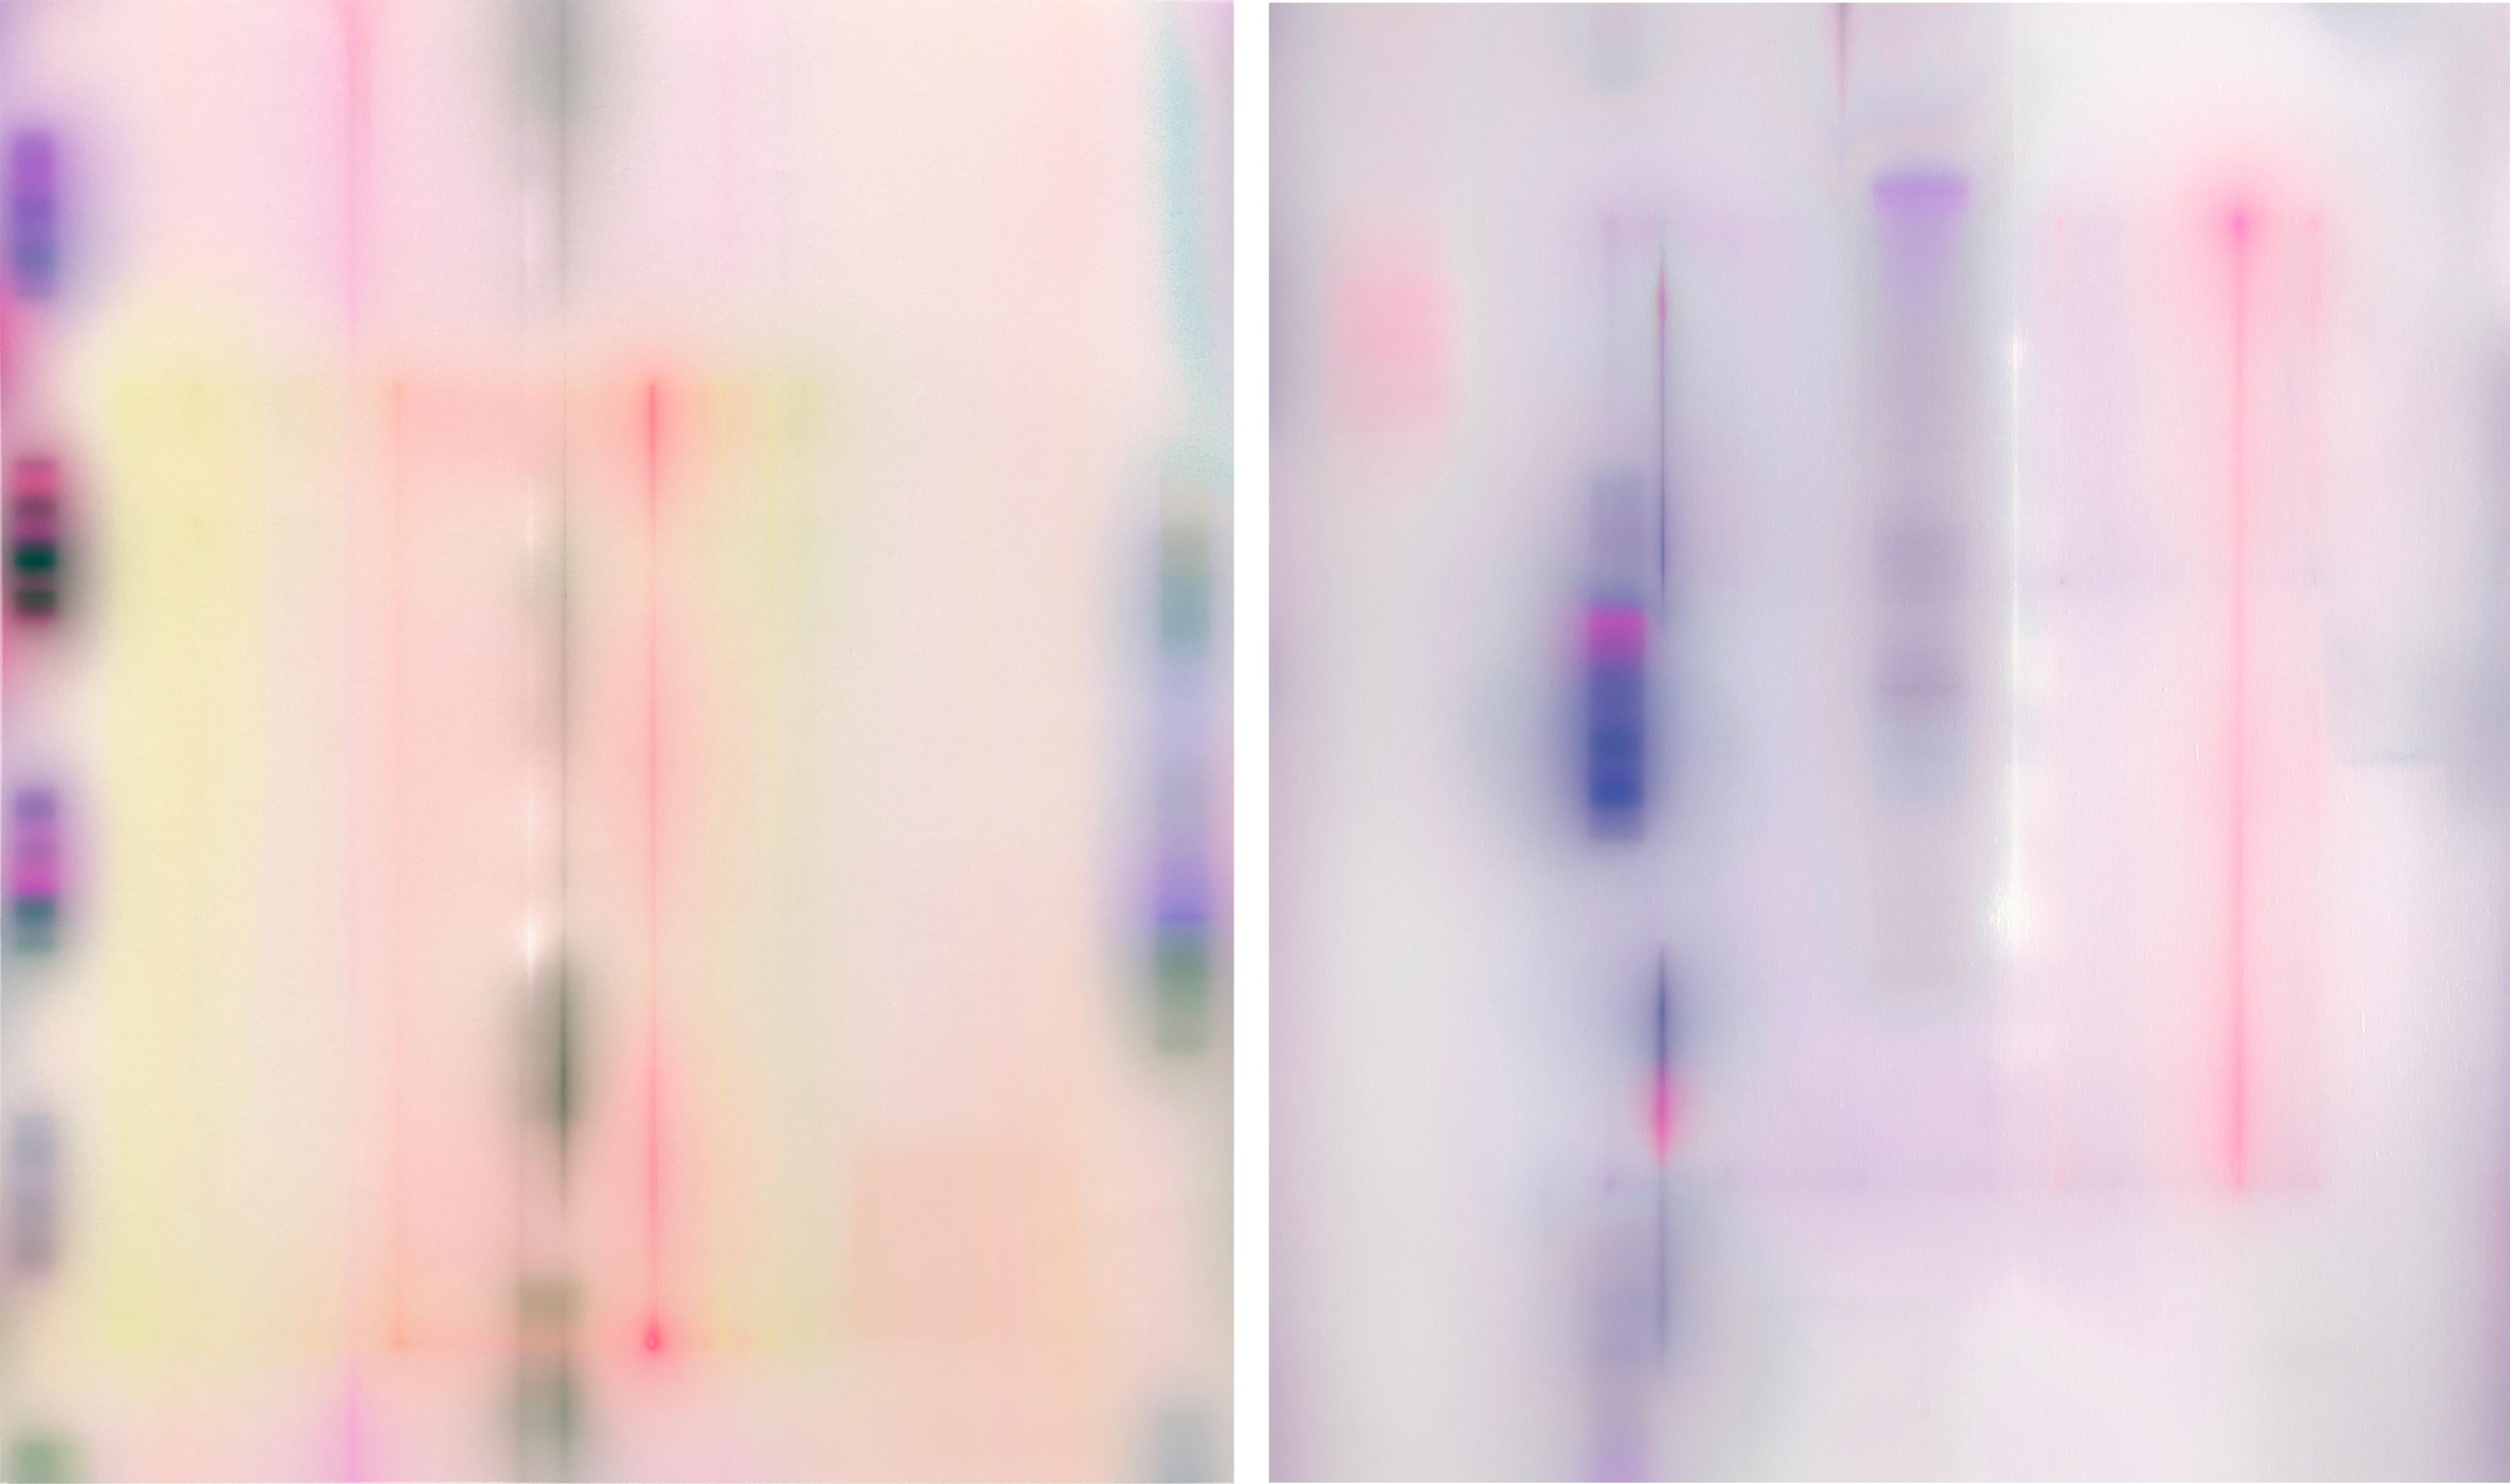 Hesper 001 and Hesper 002 Diptych, 2023 by Francisco Larios
From The Series Hesper
Acrylic, pastel chalk, airbrush, and automotive lacquer on canvas
Overall size: 100 cm H x 170 cm W
Individual Size: 100 cm H x 85 cm